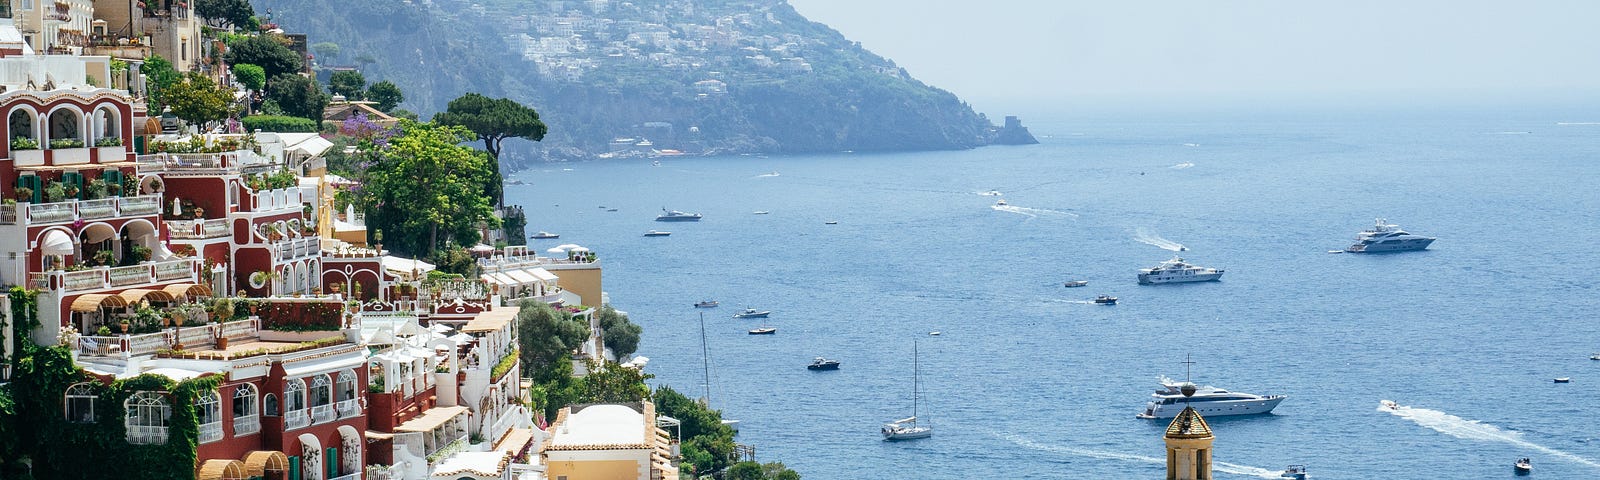 The Amalfi Coast, a hillside with colorful apartments overlooking boats on the water